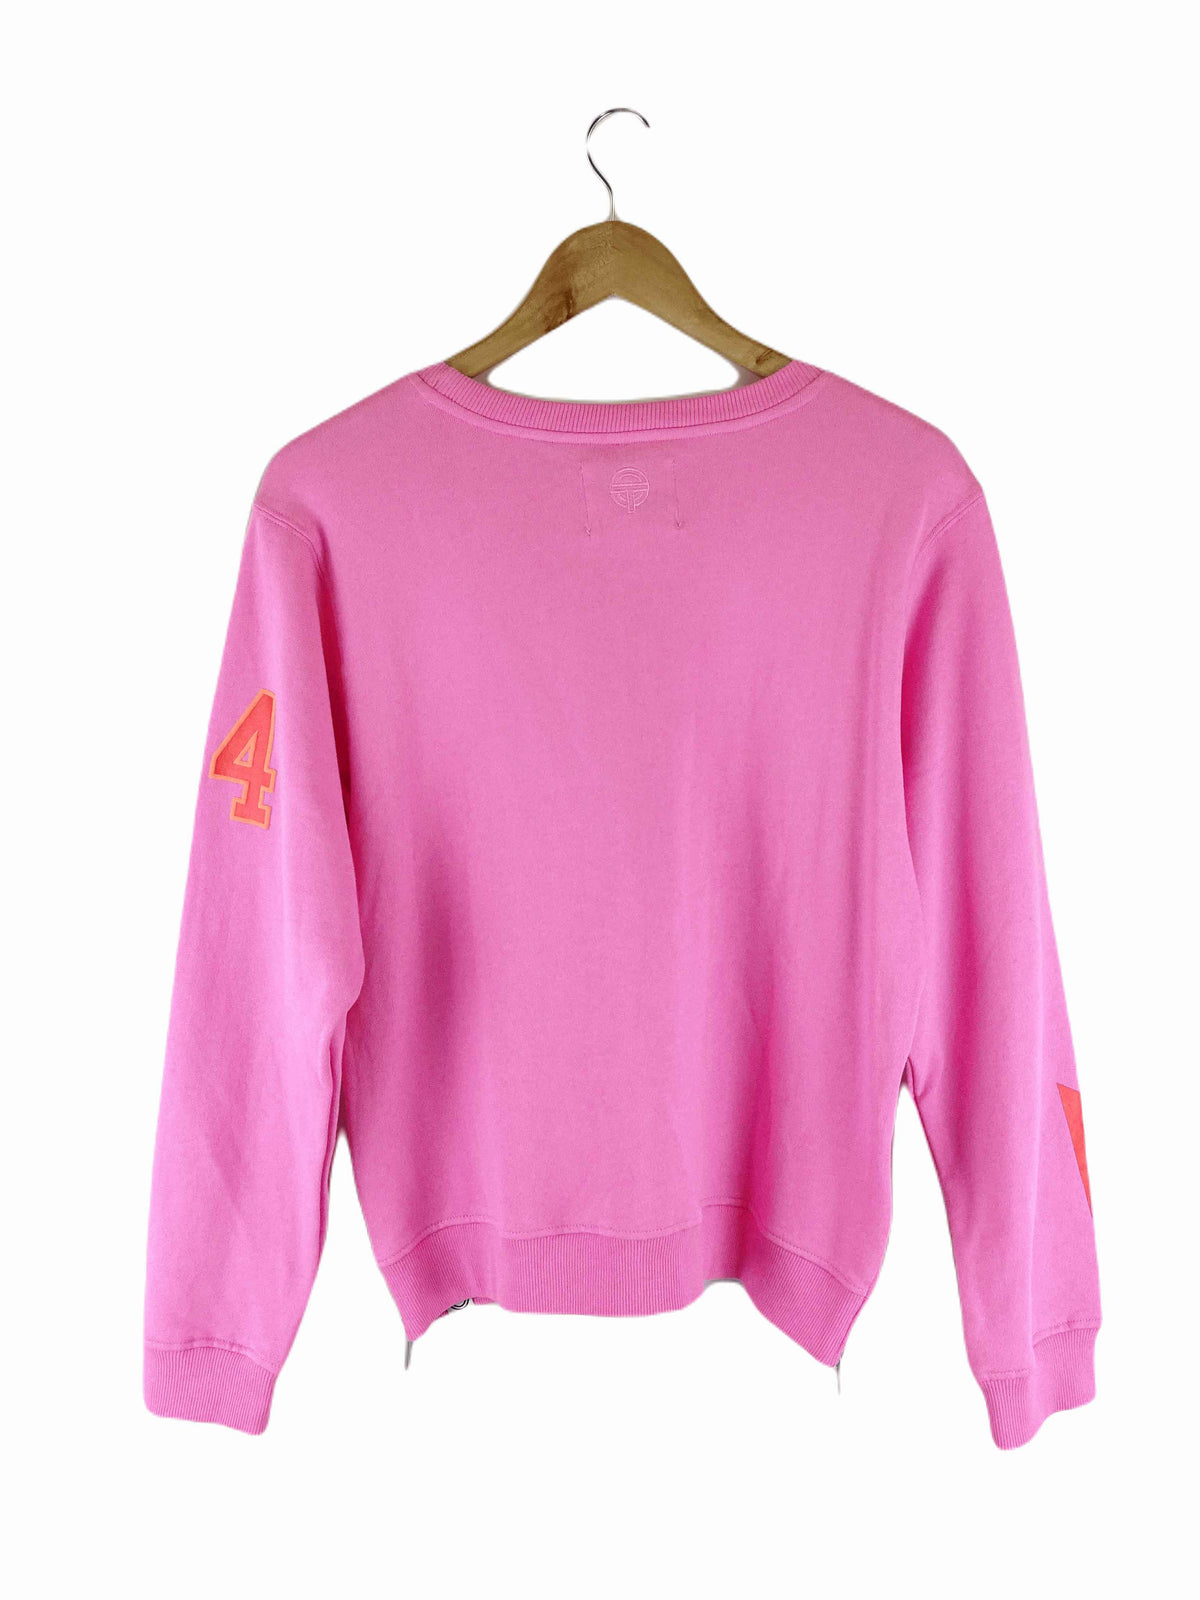 We Are The Others Pink Sweater 1